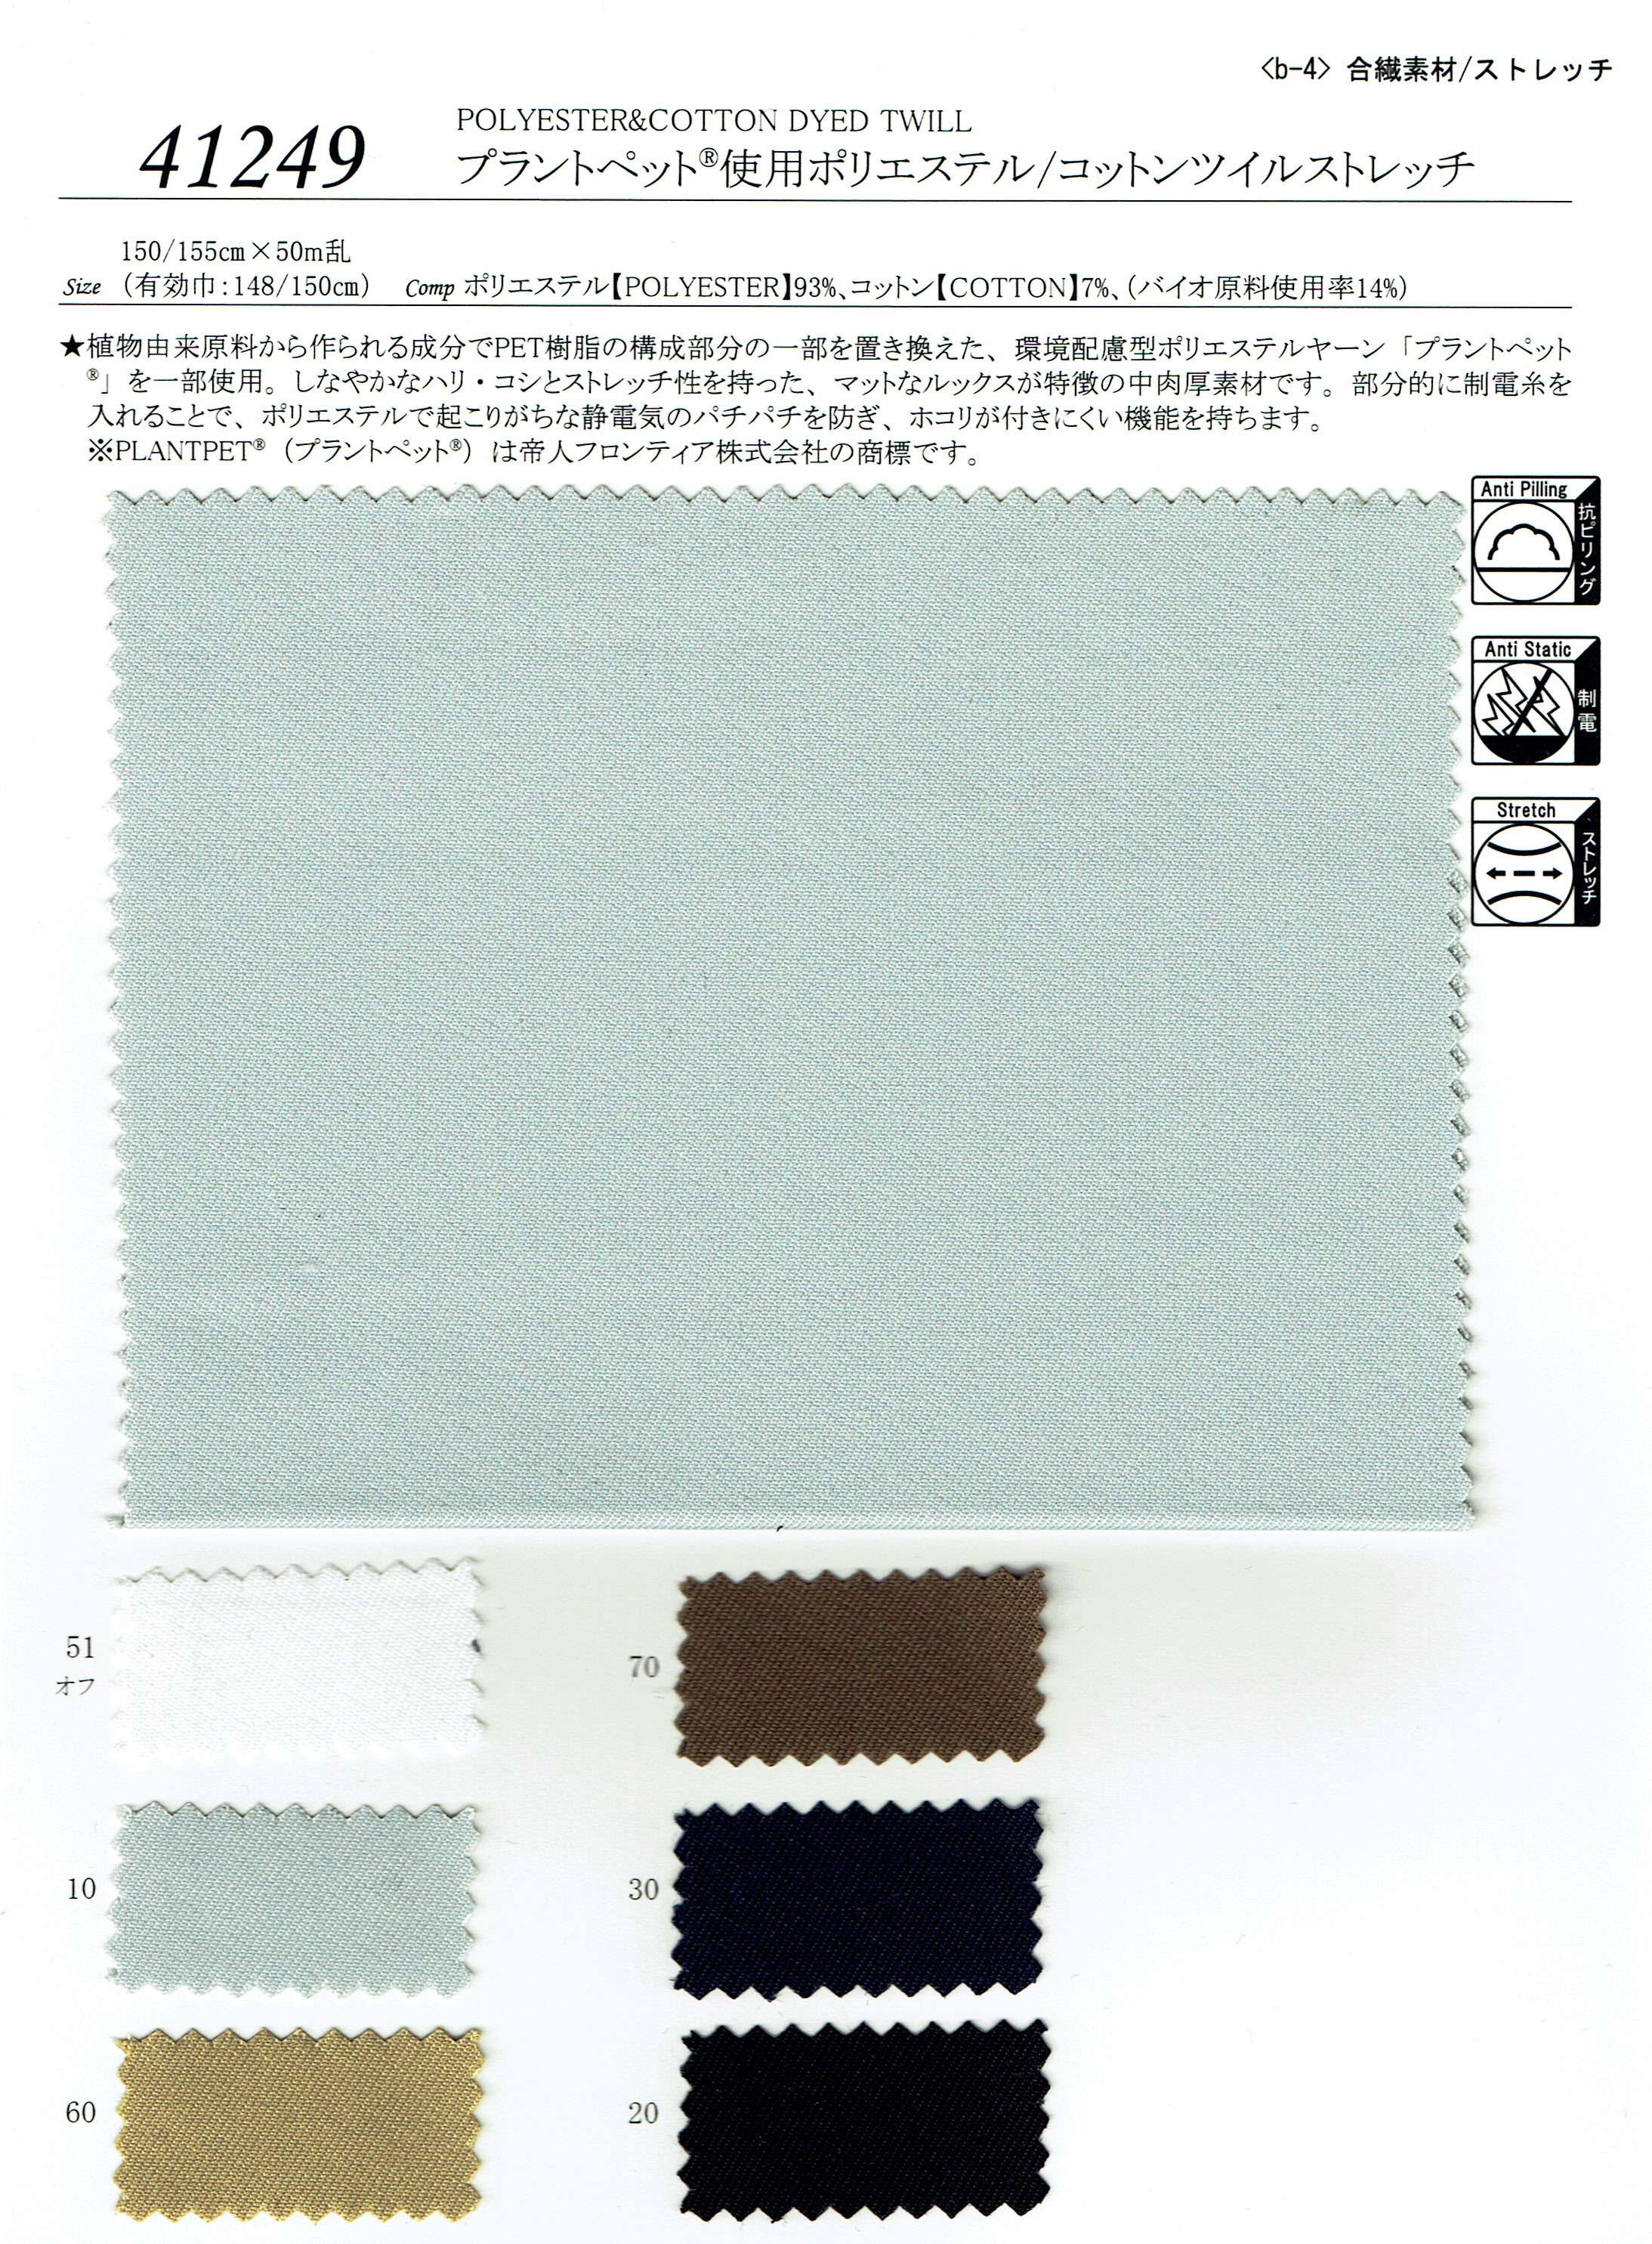 View POLYESTER93/COTTON7/[????14%] DYED TWILL DYED TWILL